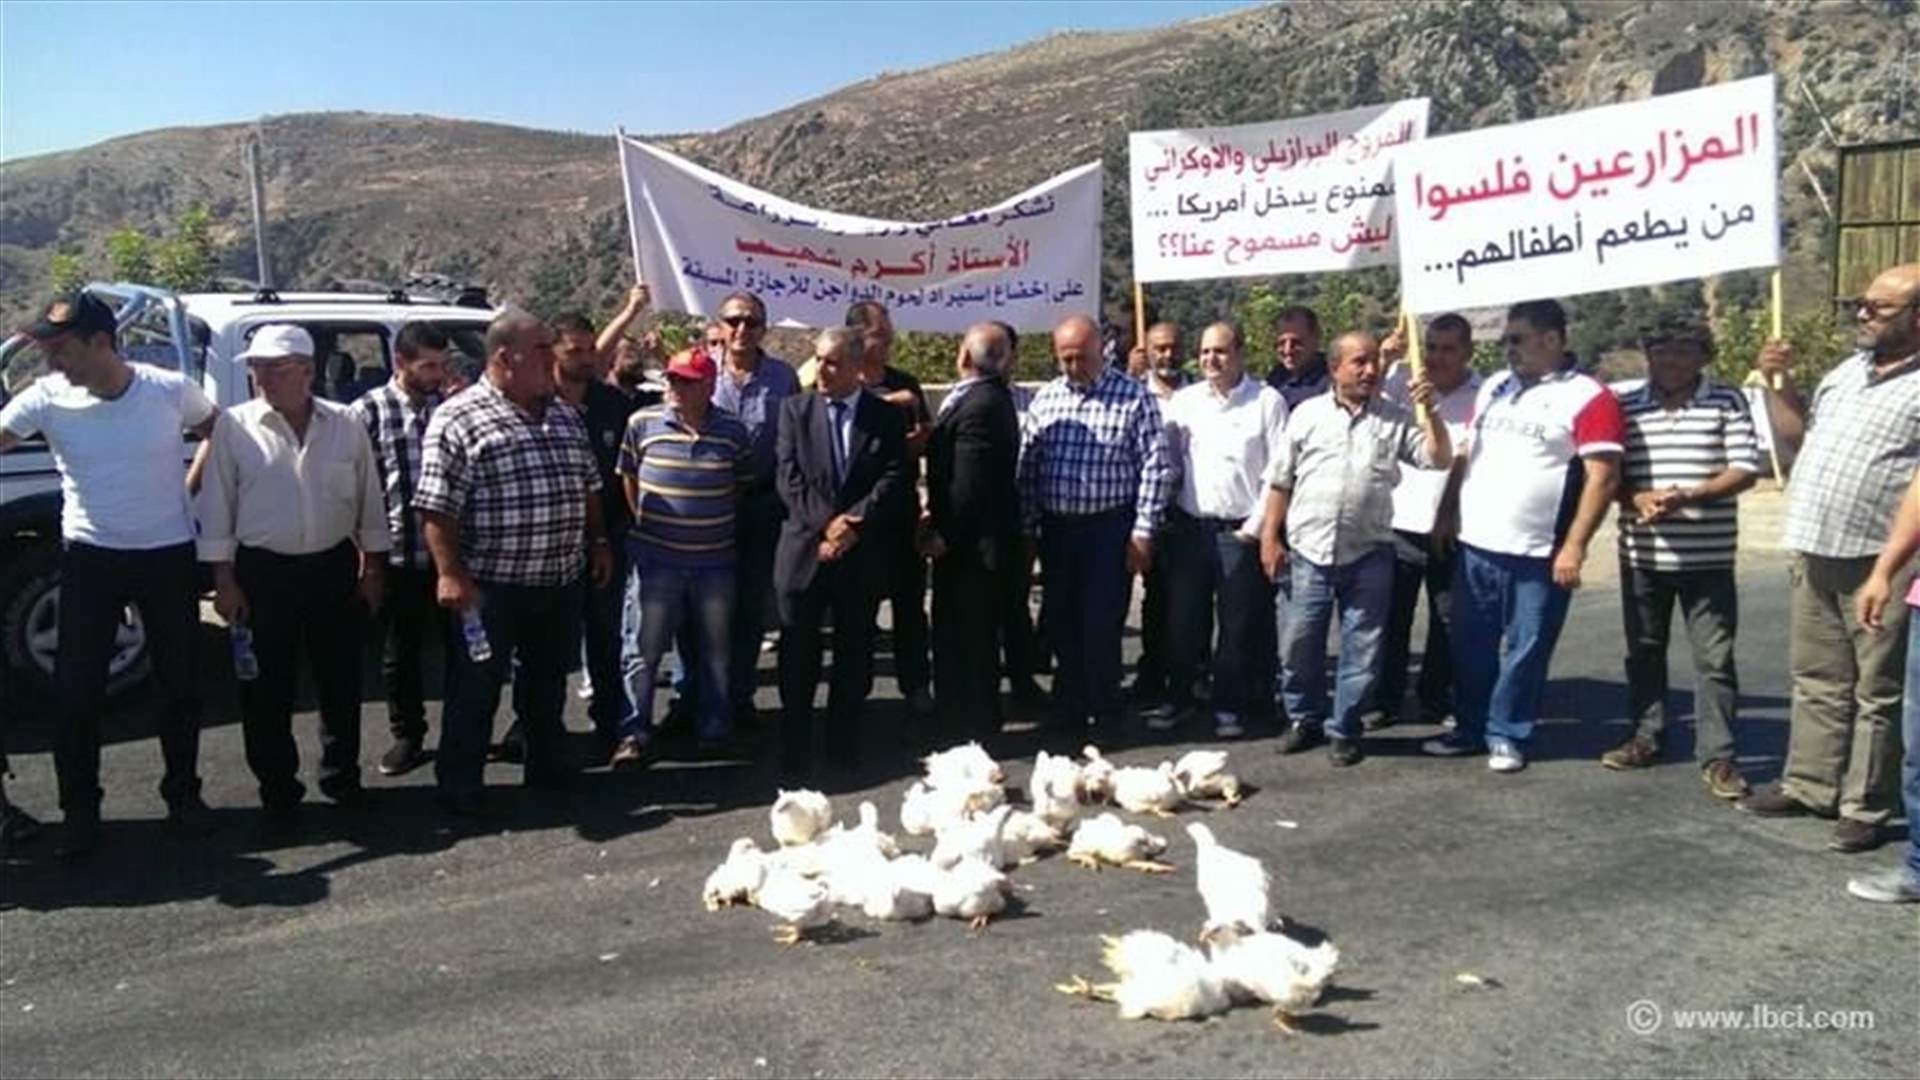 [PHOTOS] Poultry farmers stage protest in South Lebanon